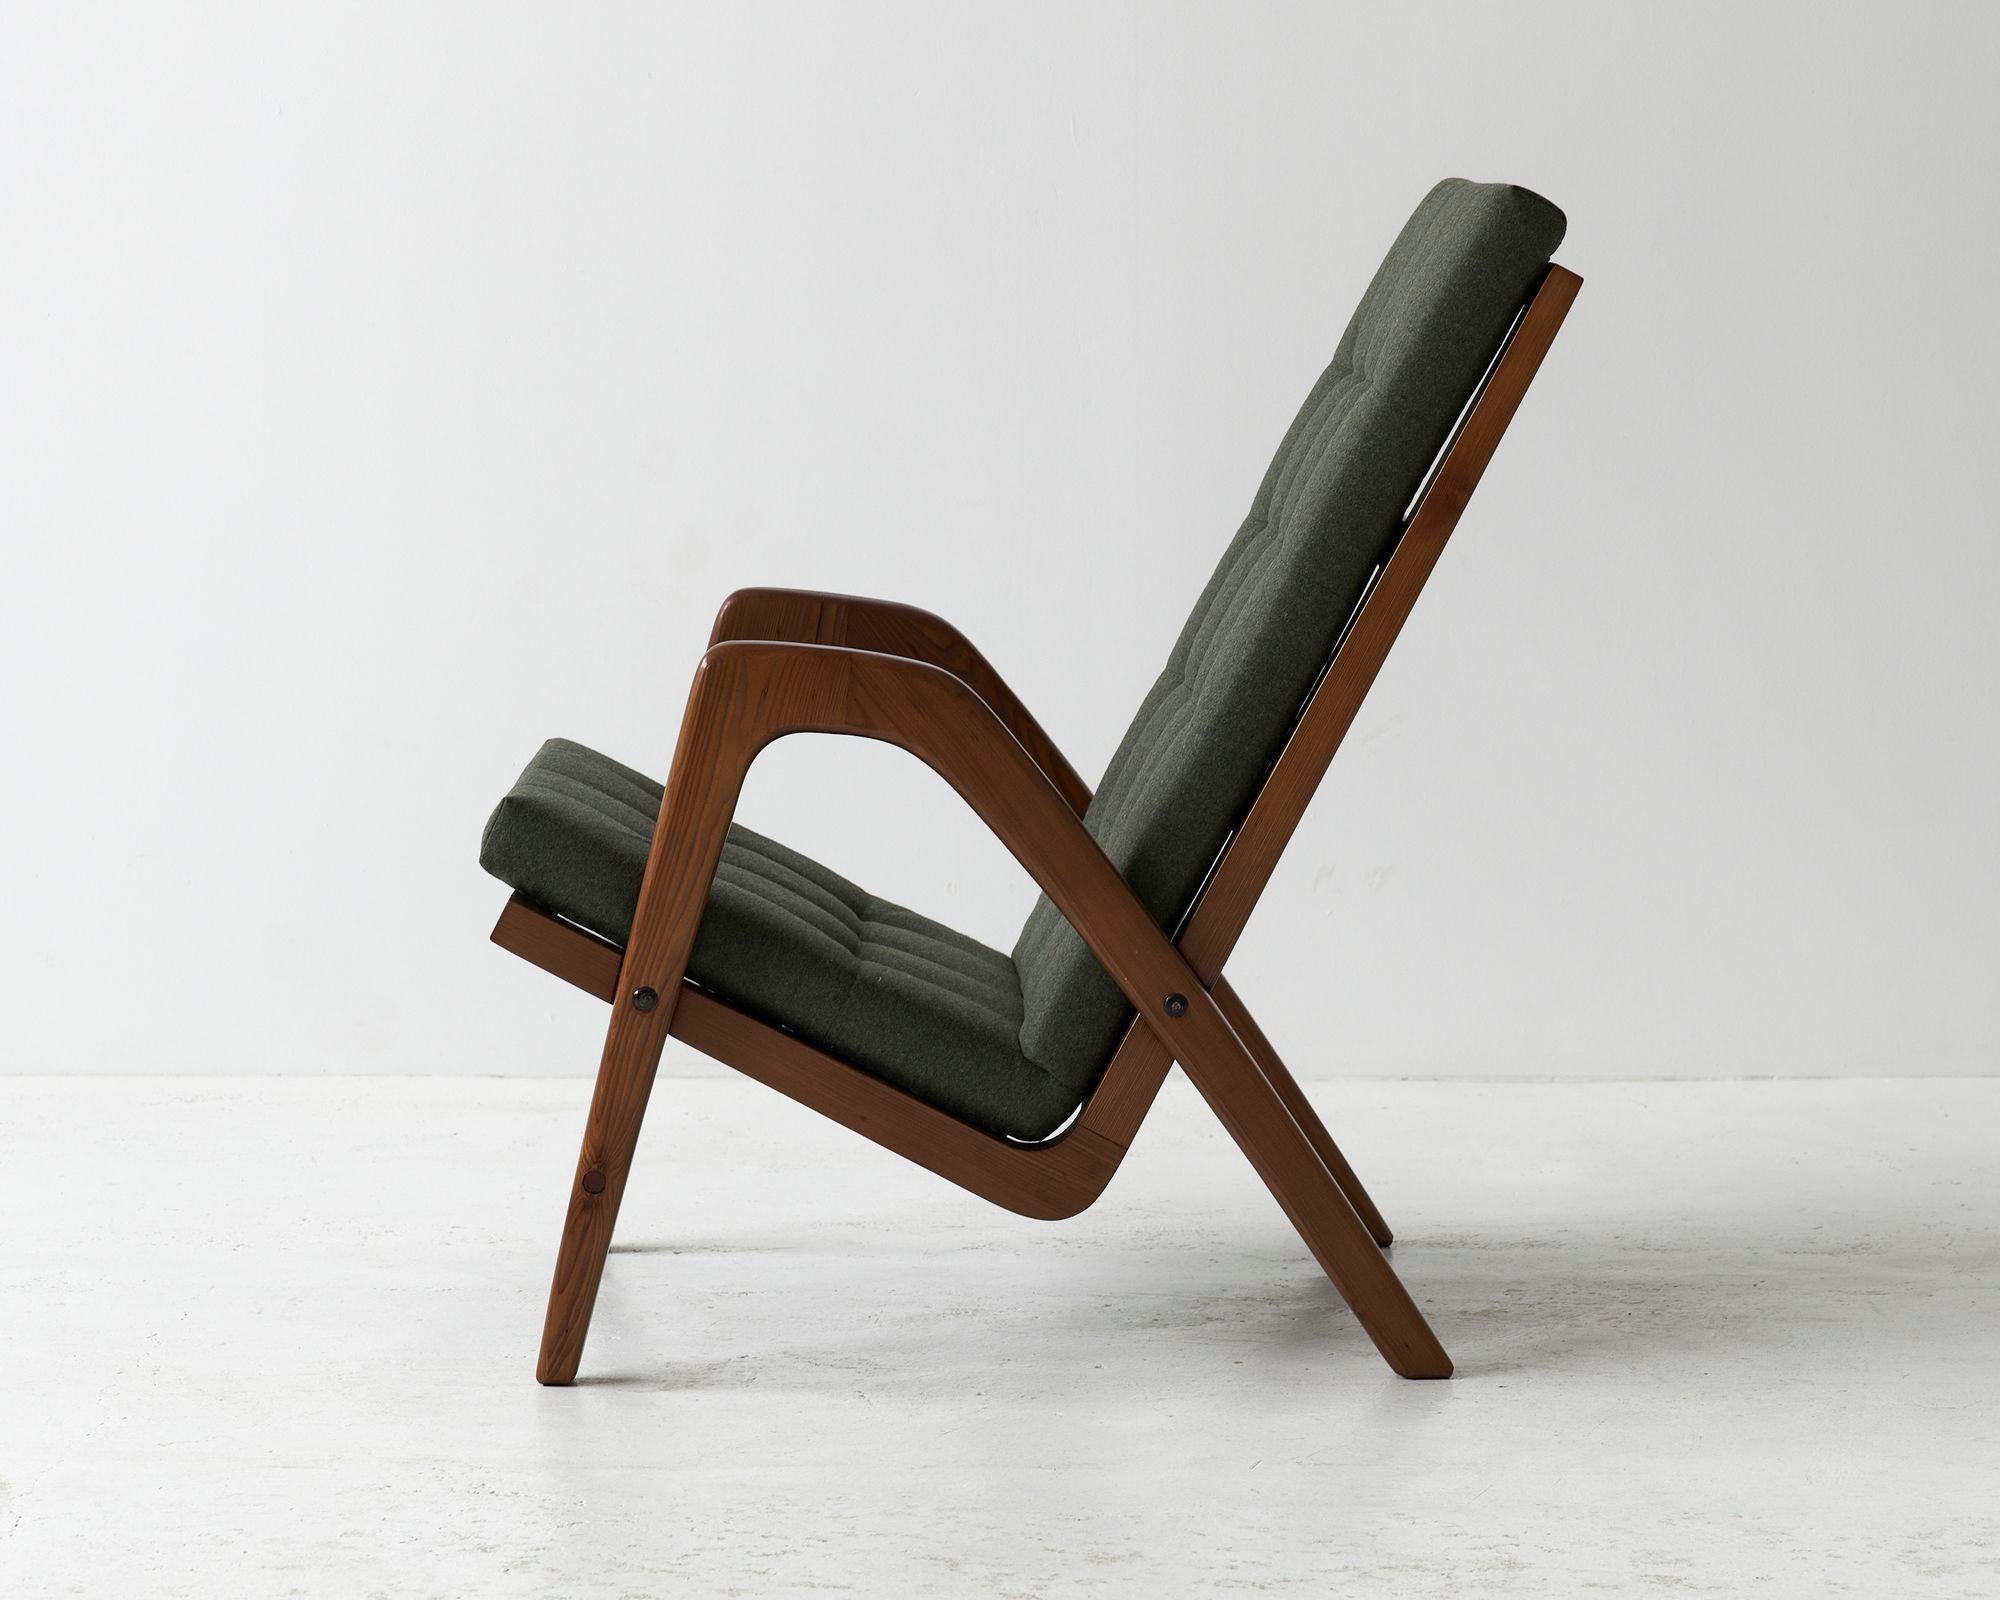 1960s armchair designed by a great czechoslovakian architect Jan Vaňek for ULUV.

Striking oak wood frame. Seating recreated and covered with high quality olive synthetic wool.